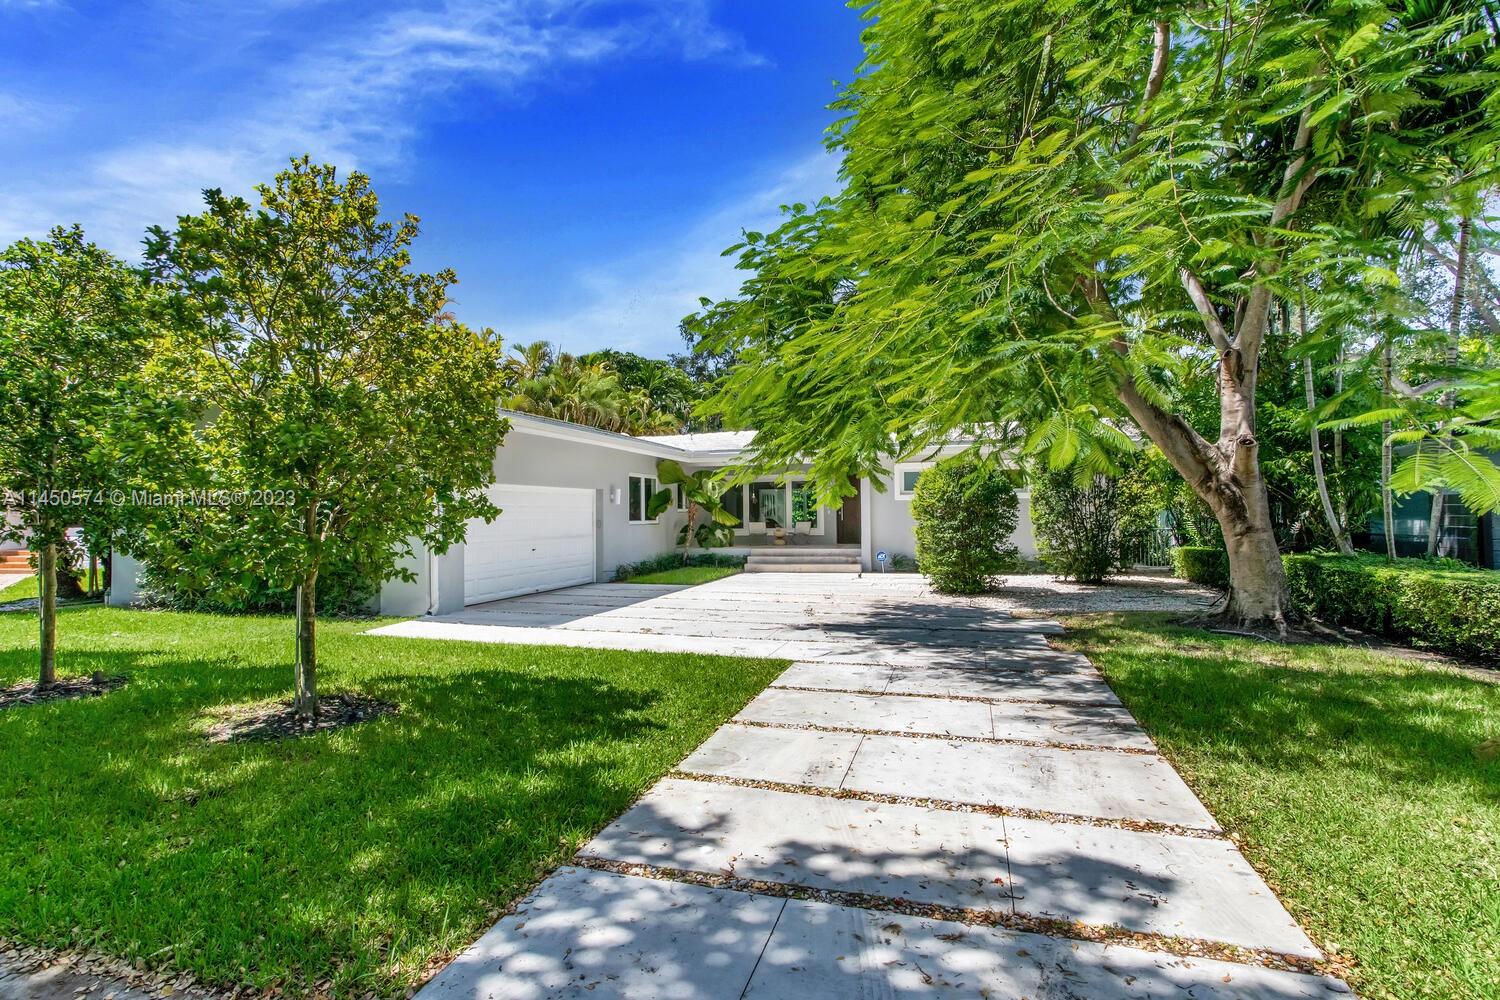 Stunning mid-century modern home on a quiet tree-lined street in Bay Heights - a walled North Grove community with 24/7 security patrol. Light-filled living spaces feature original terrazzo flooring & expansive windows throughout. Open concept floorplan w/ formal living, dining & family room + large flex space (can be converted to 4th BR). Major updates include: all plumbing & electrical, custom closets & all impact glass. Chef’s kitchen offers wood cabinetry, stone countertops, high-end appliances, dual zone-140 bottle wine refrigerator, cooking island & separate breakfast area.  Floor to ceiling sliding glass doors open to ultra-private garden & tranquil pool. Enjoy nearby bayfront parks and shopping & dining in the historic Grove village. Minutes to downtown, Key Biscayne & the Beaches.